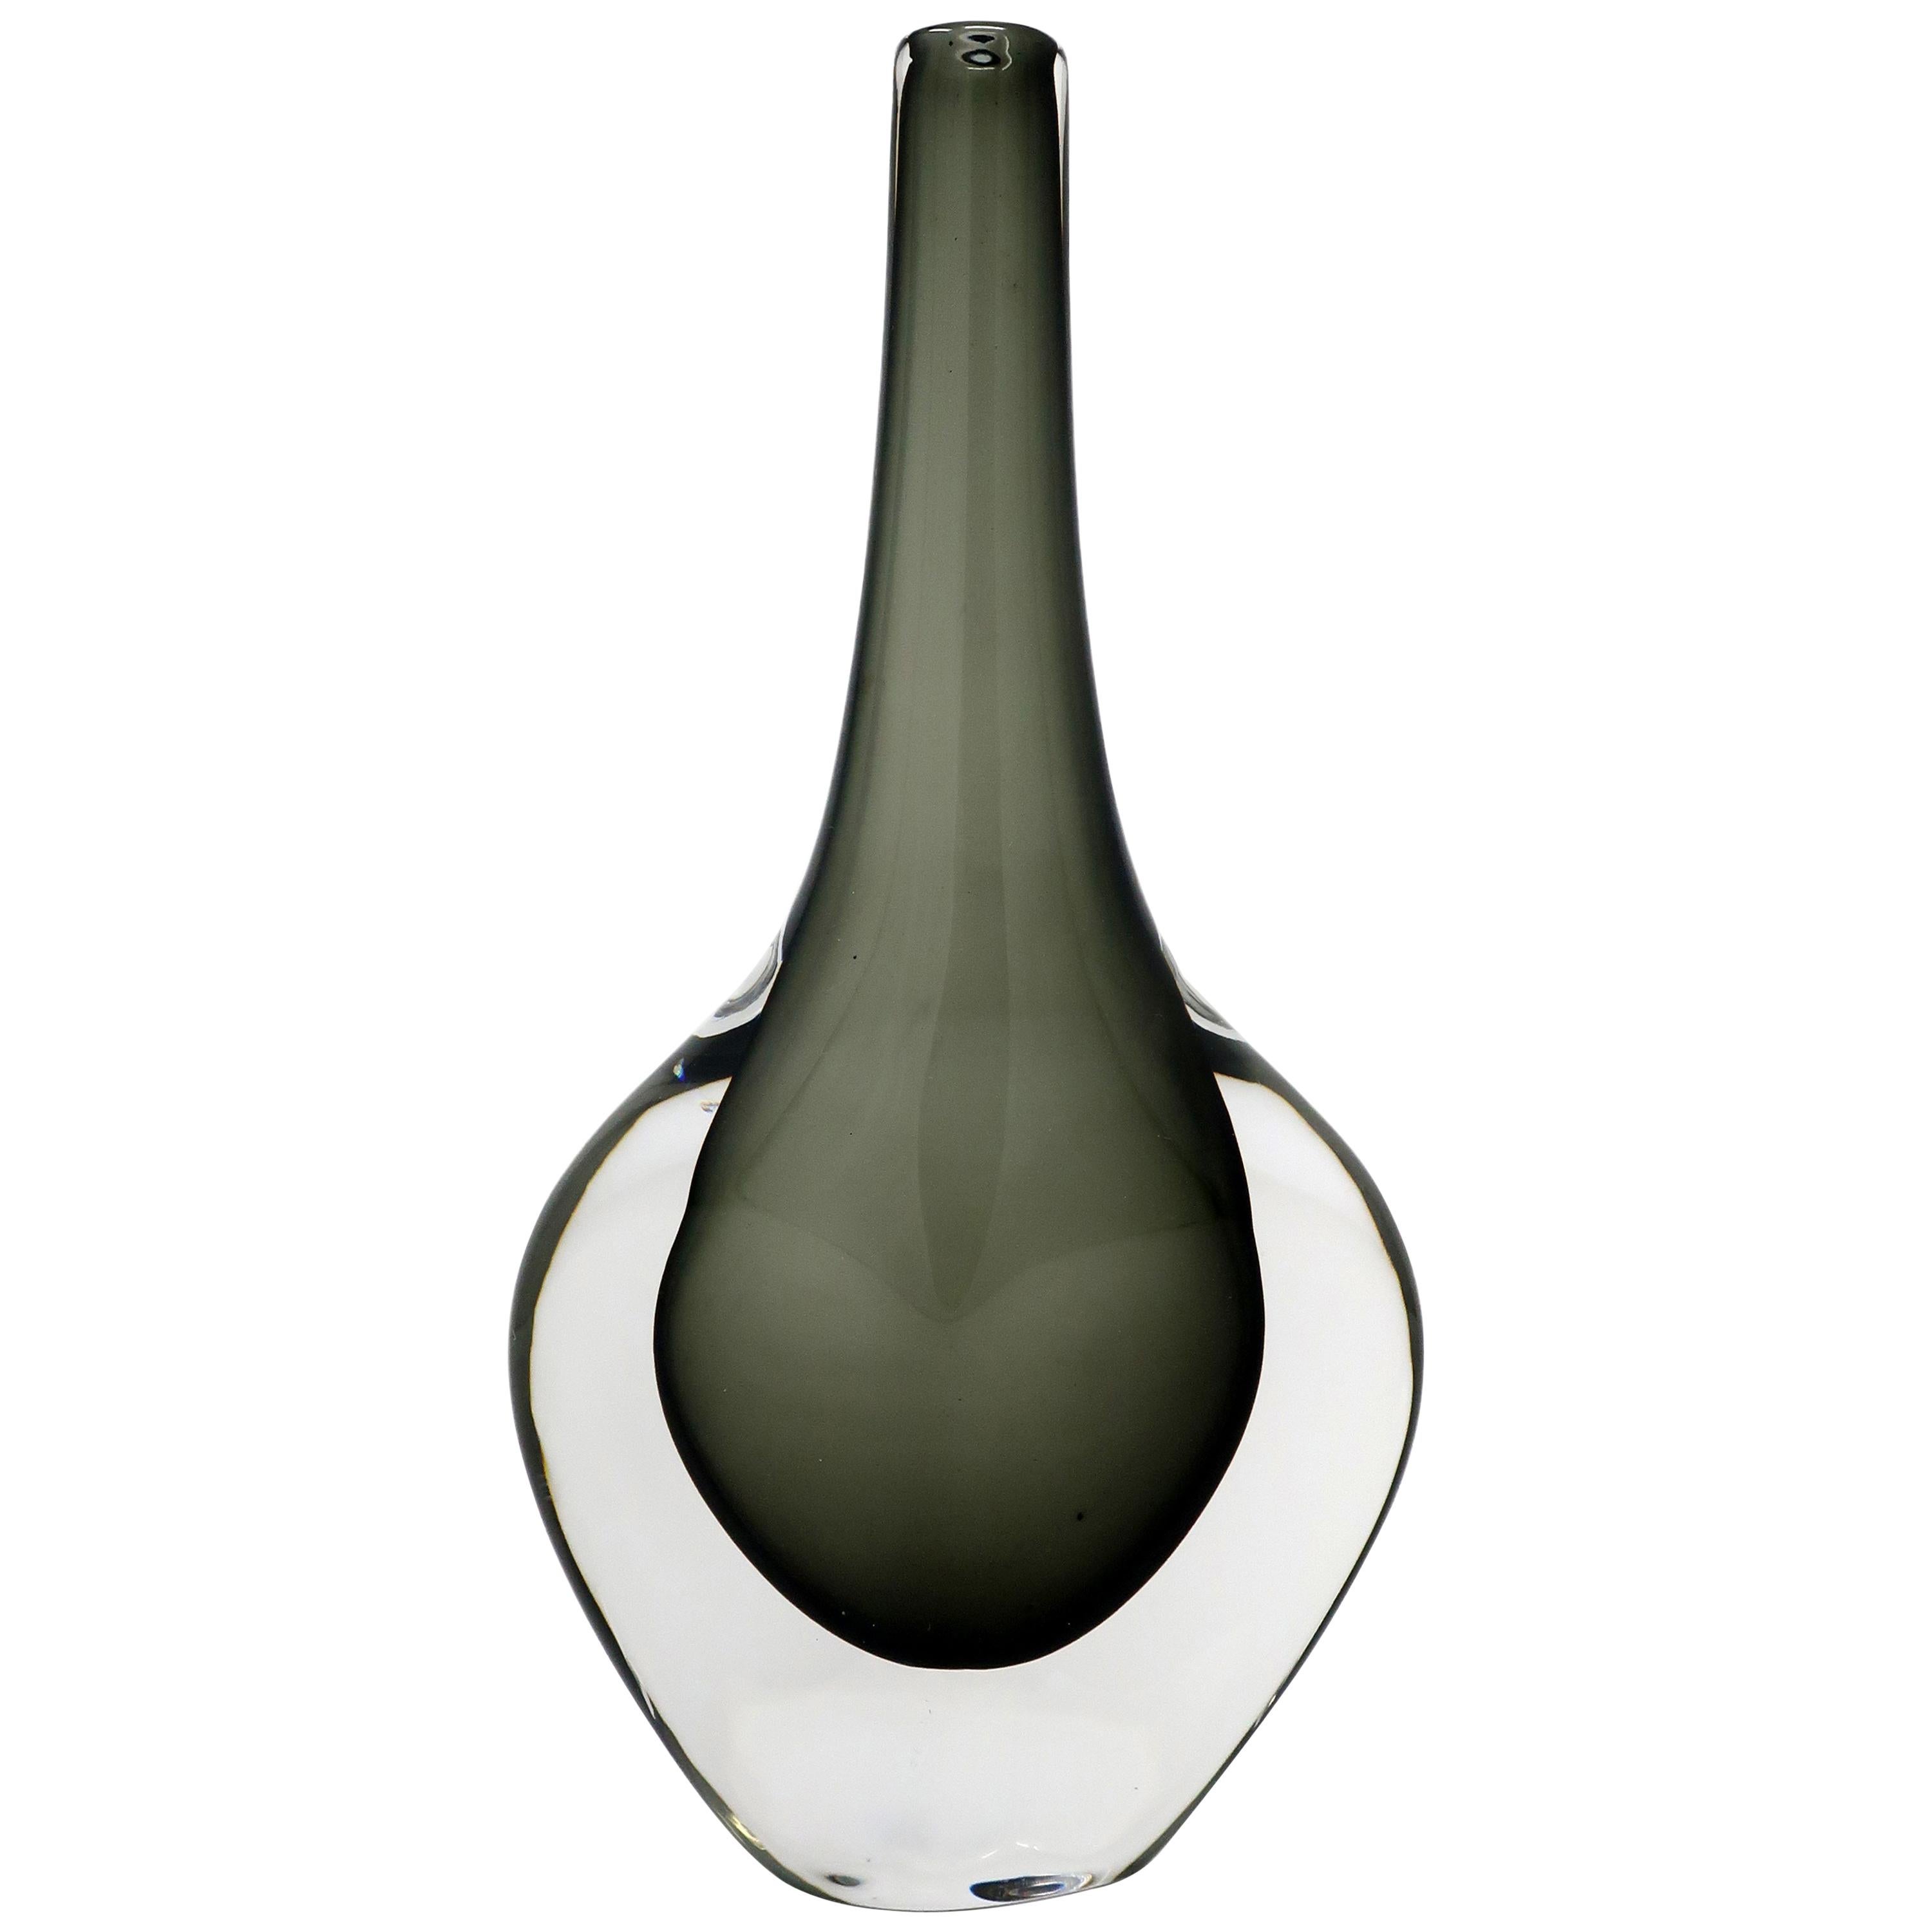 Tall Smoked Glass Vase by Nils Landberg for Orrefors